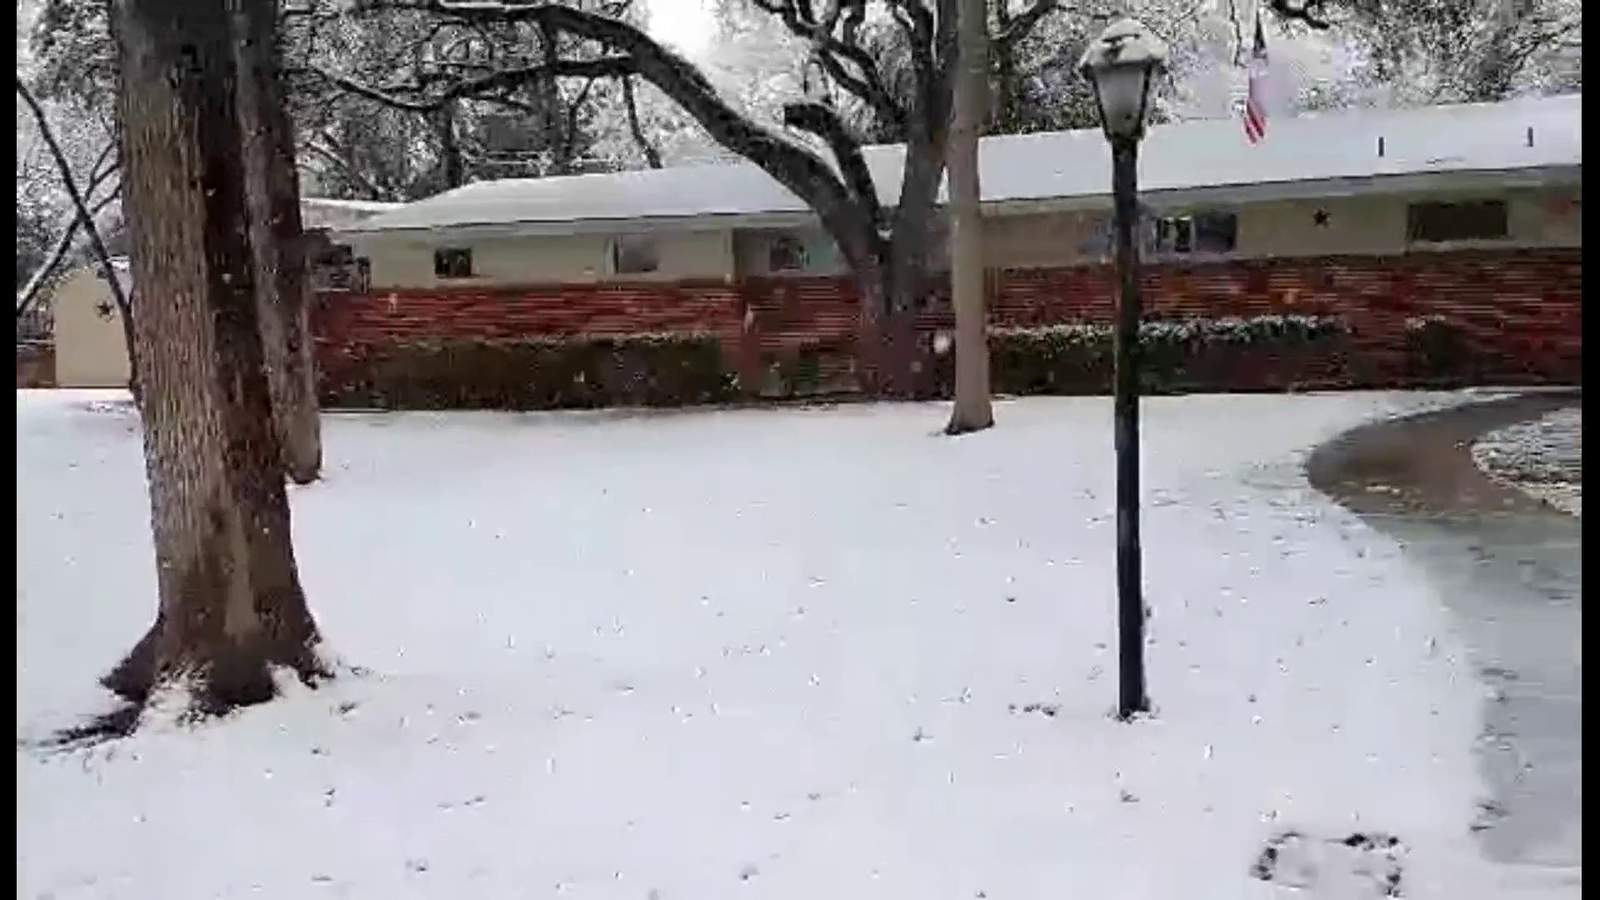 VIDEO: Check out this snow scene from Temple, Texas